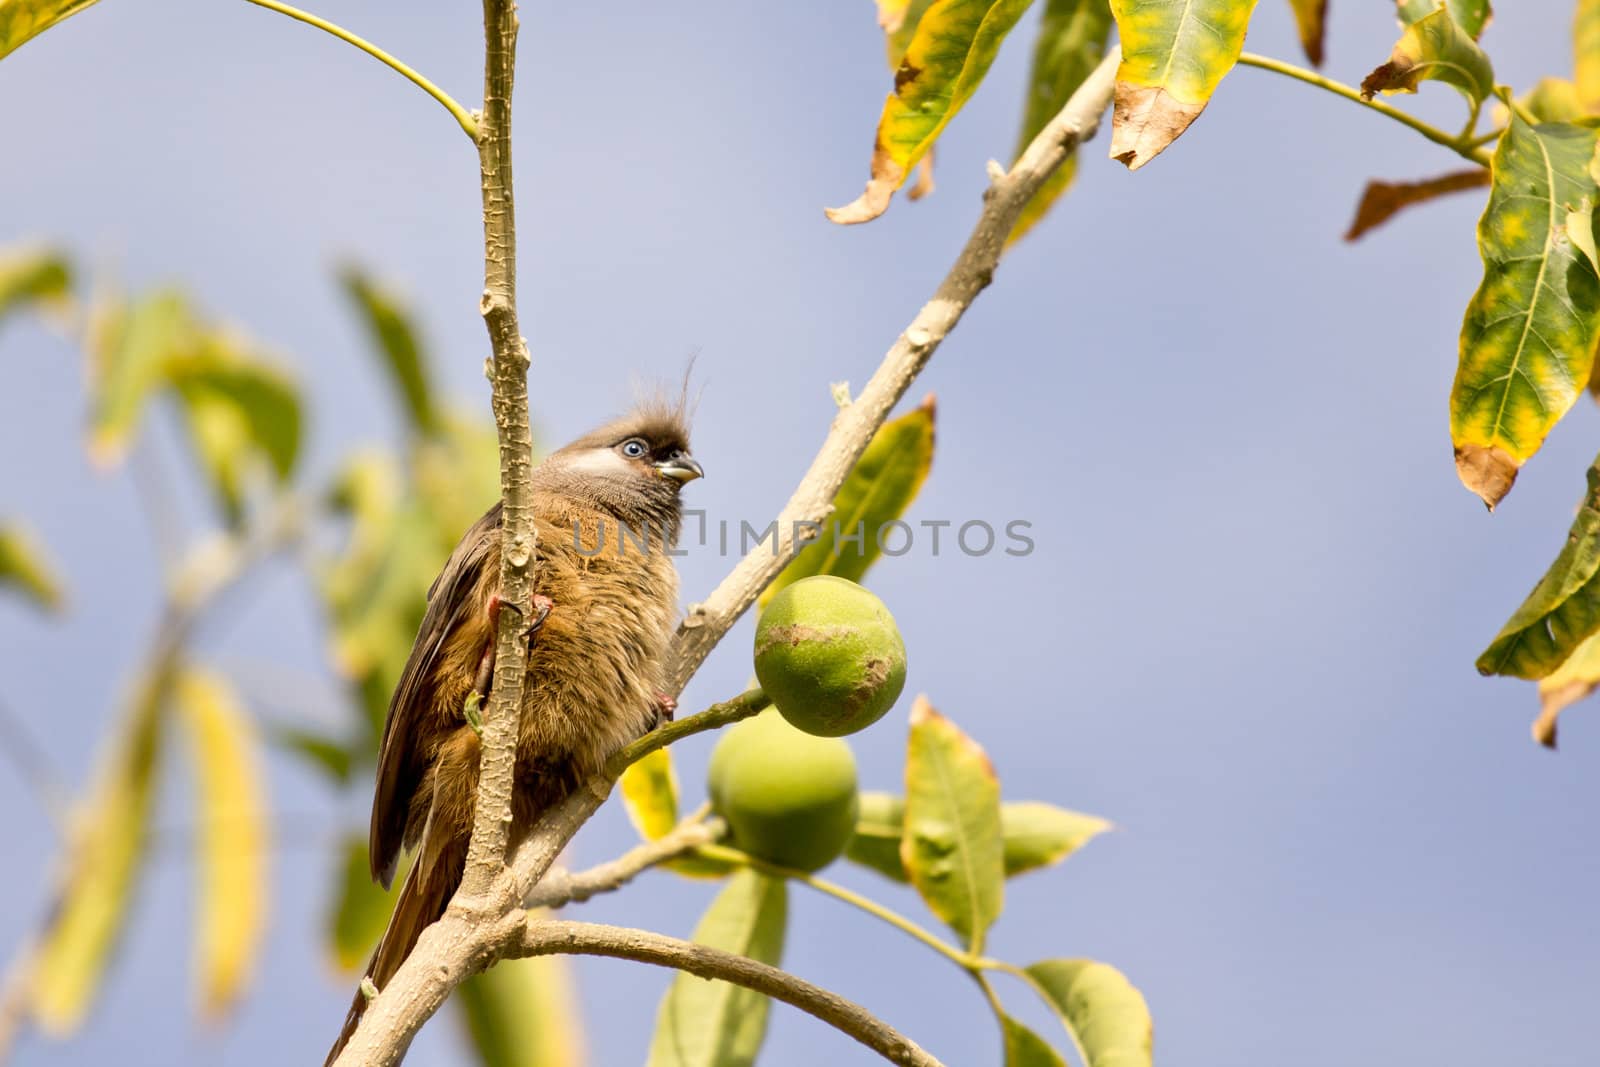 A beautiful long tailed Speckled Mousebird sitting on a thin twig